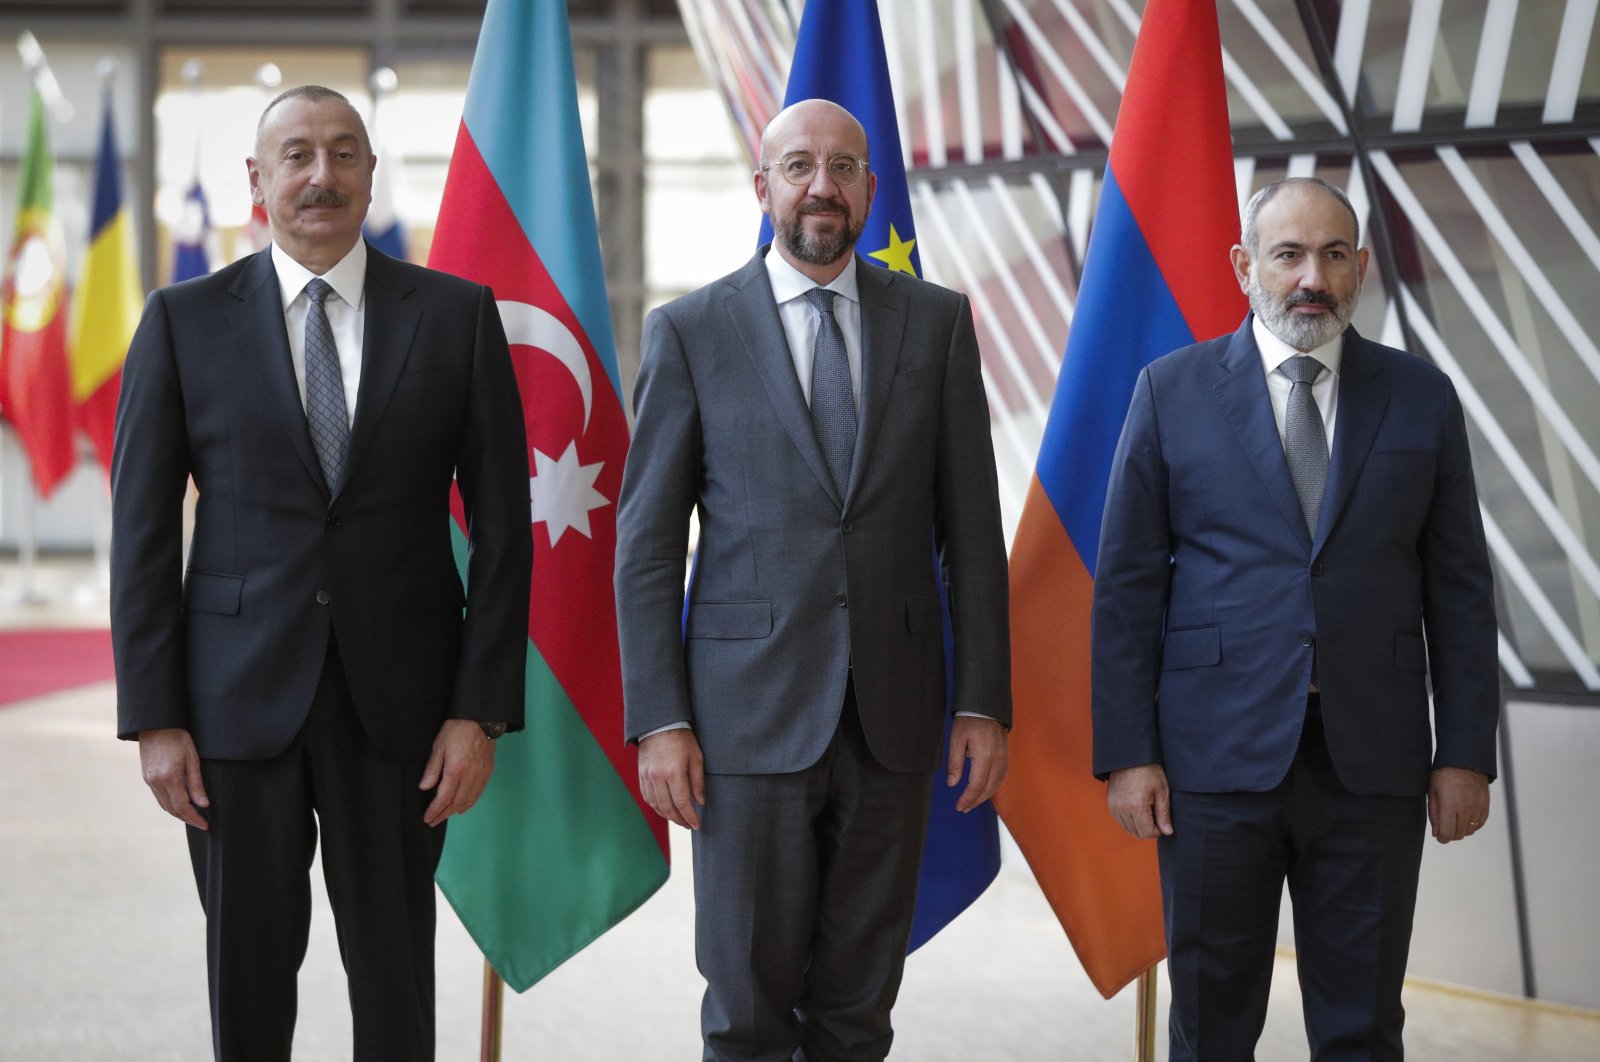 Azerbaijan&#039;s President Ilham Aliyev (L) and Armenia&#039;s Prime Minister Nikol Pashinyan are welcomed by the European Council President Charles Michel (C) in Brussels, Belgium, Aug. 31, 2022. (IHA Photo)